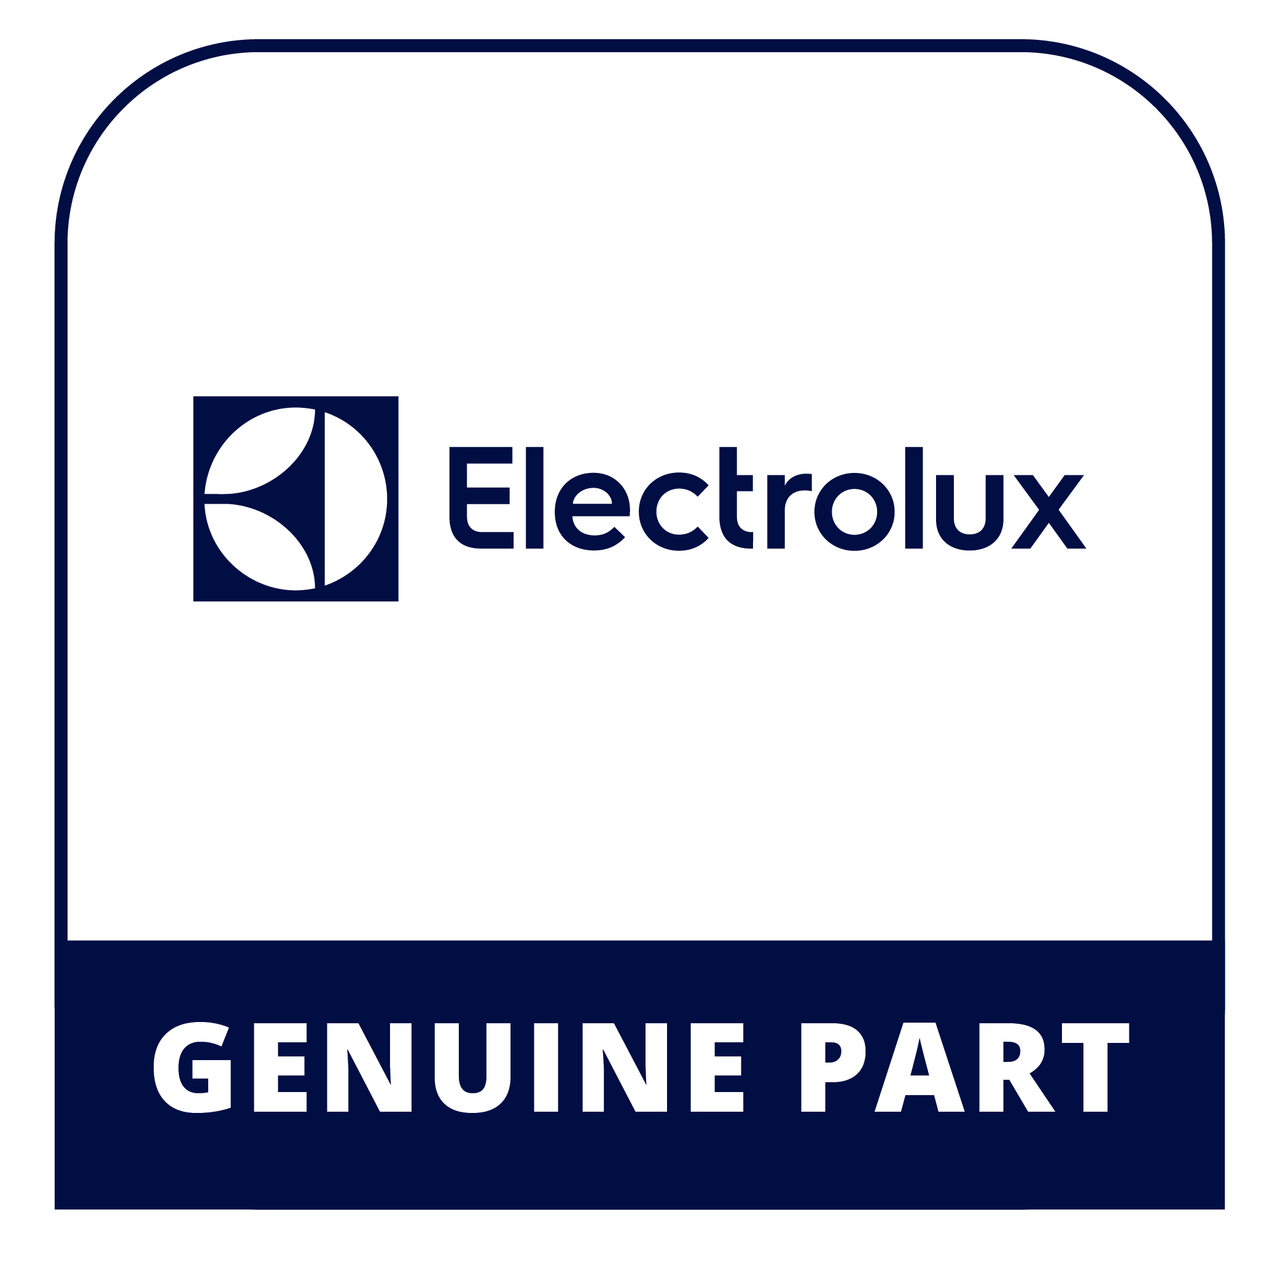 Frigidaire - Electrolux 297088400 Owners Manual - Genuine Electrolux Part